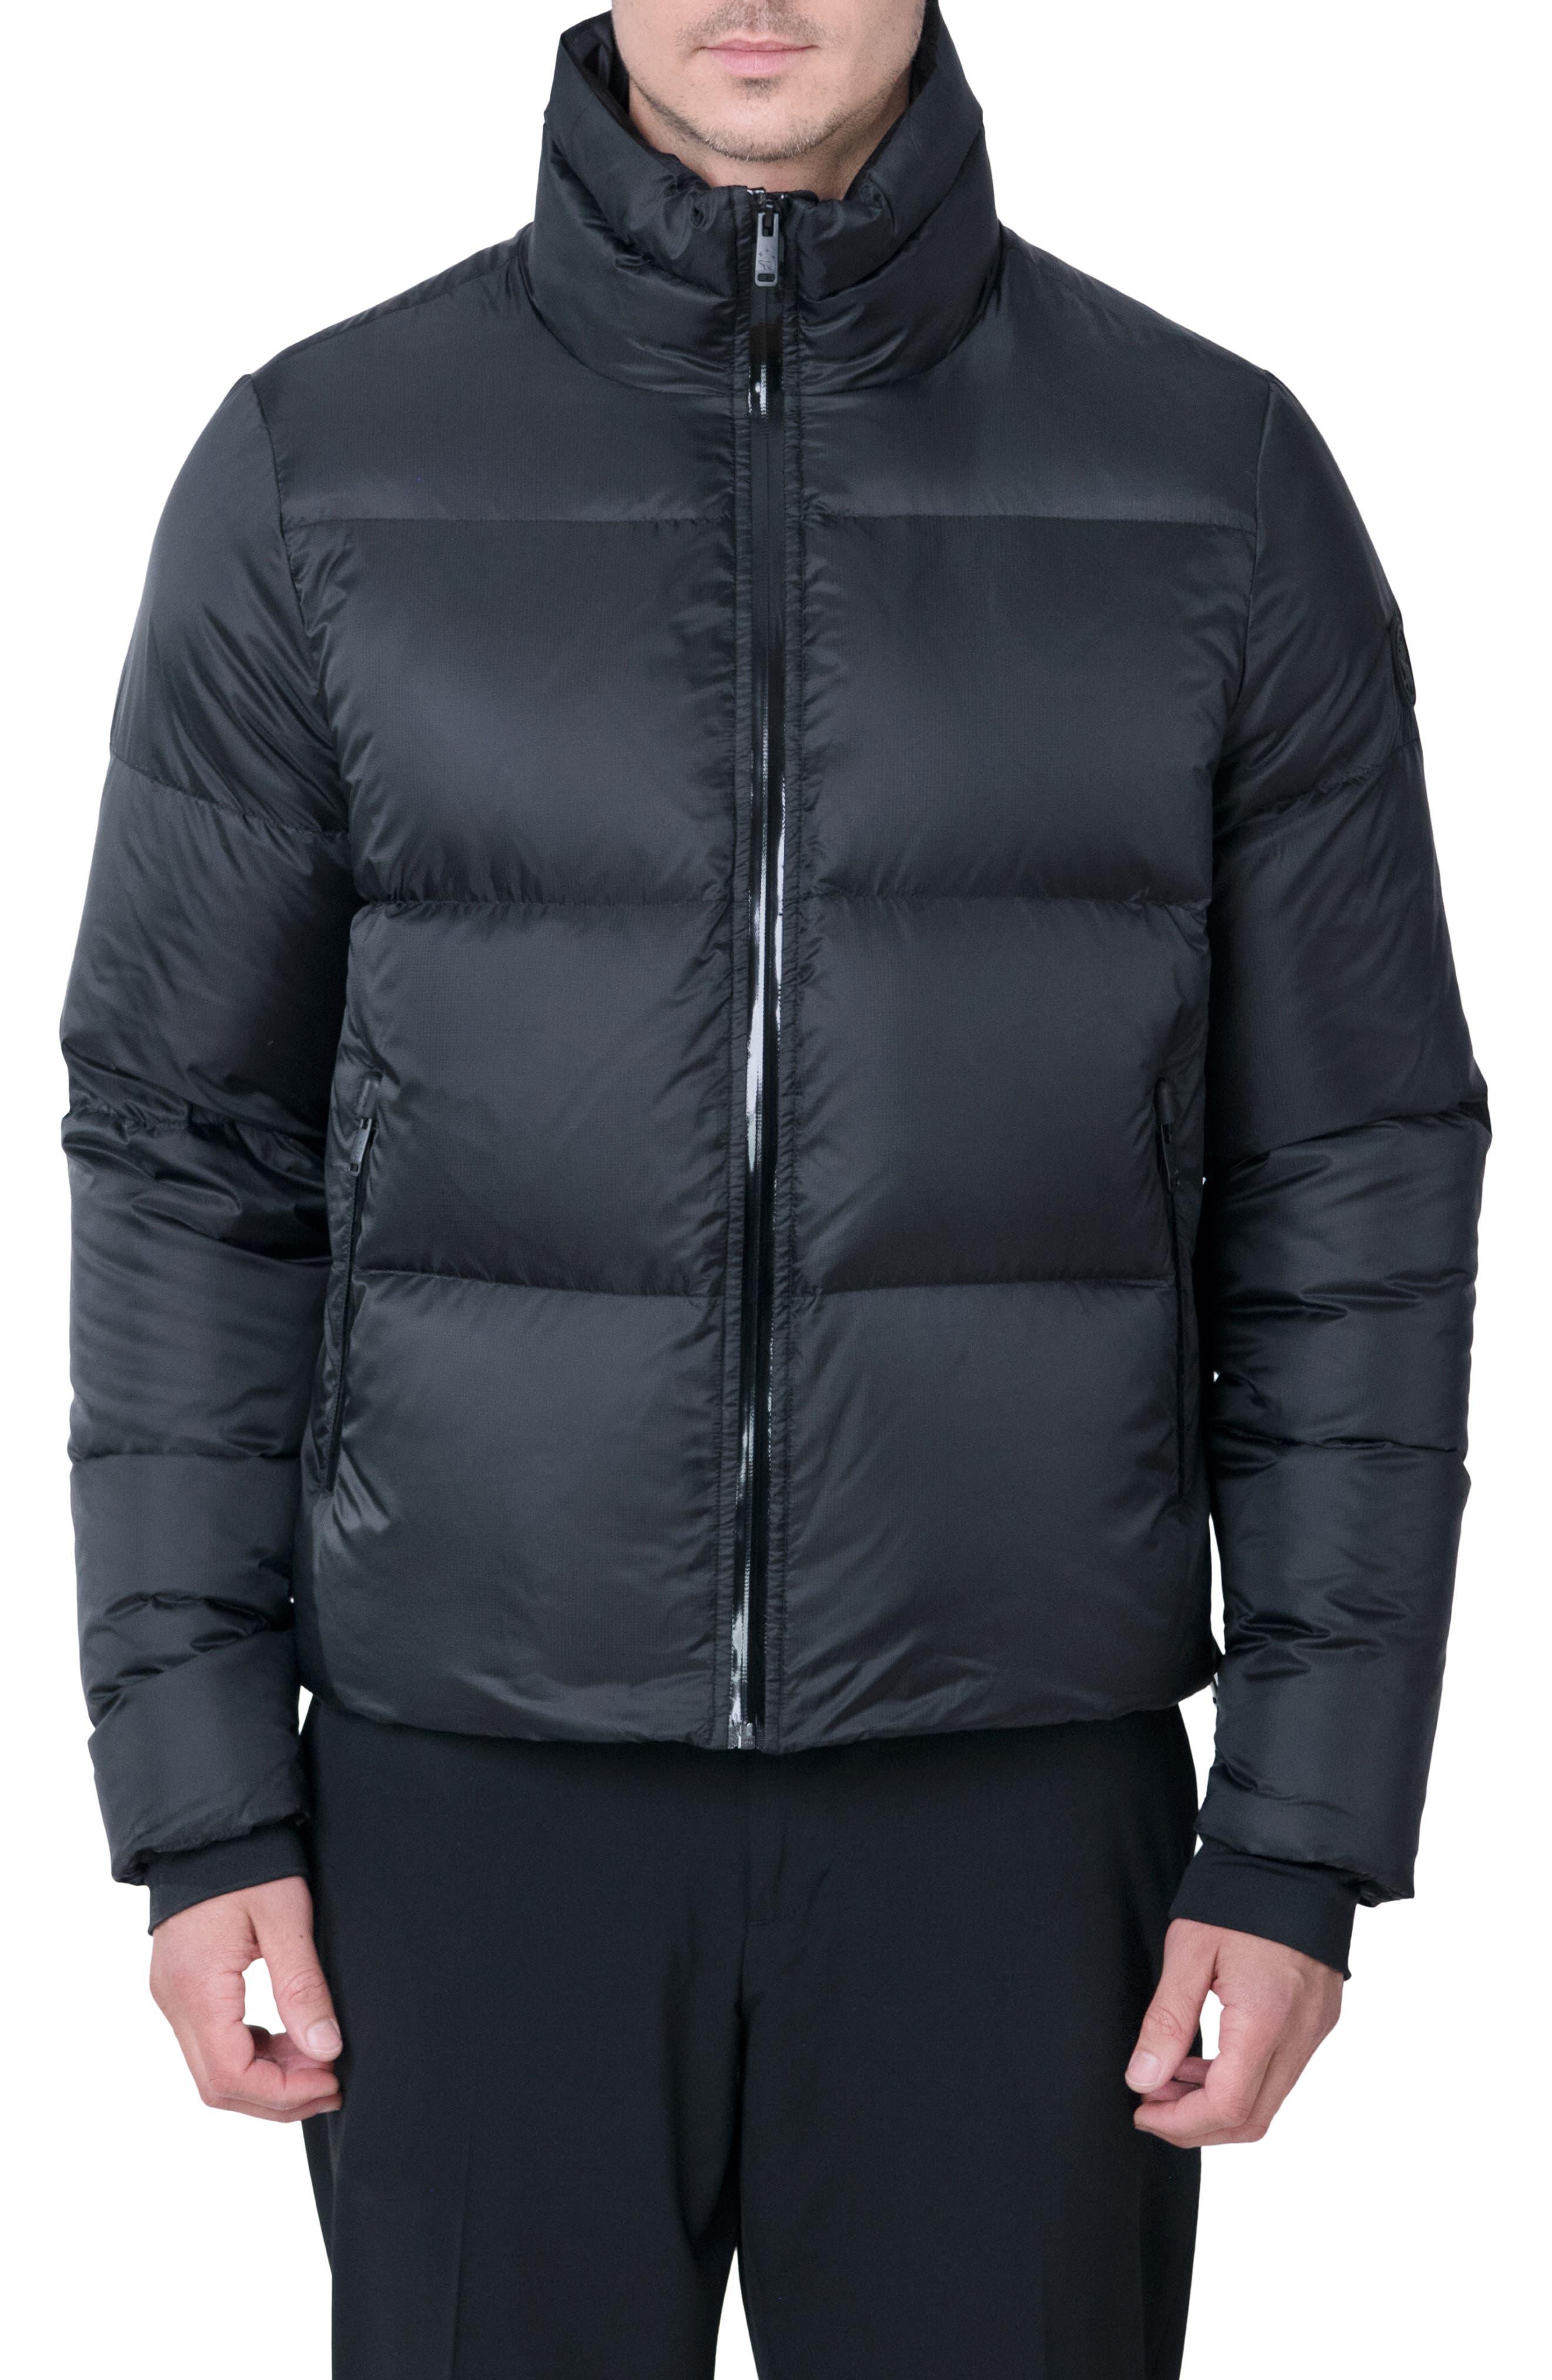 The Recycled Planet Company Revo Waterproof Recycled Down Puffer Jacket ...